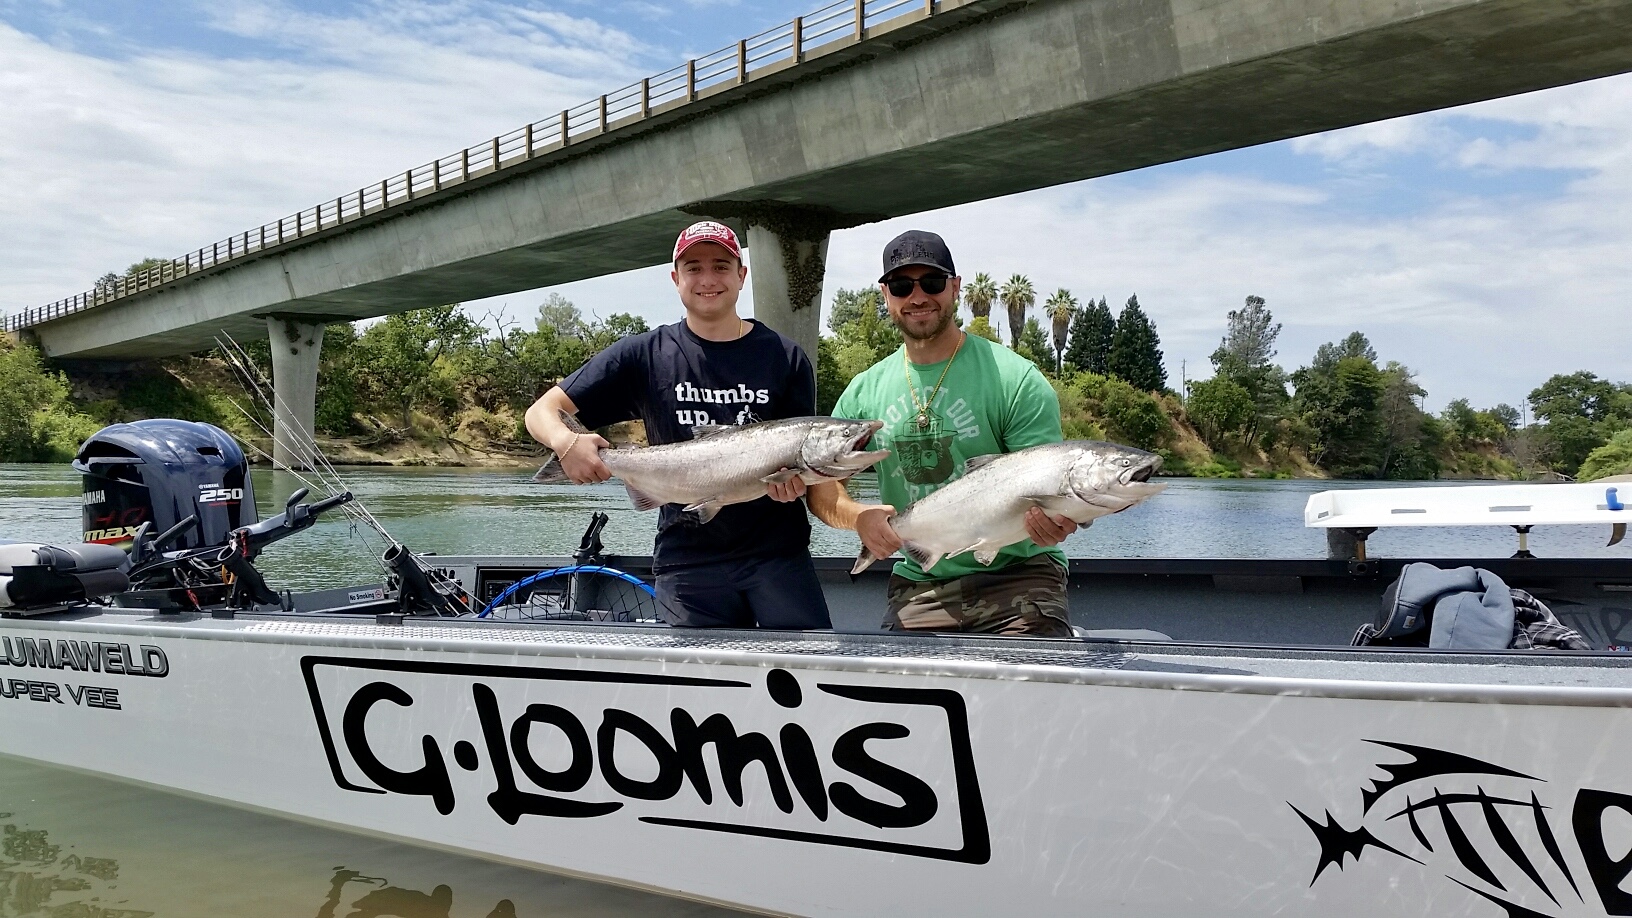 Our Captains are catching Sac salmon daily!